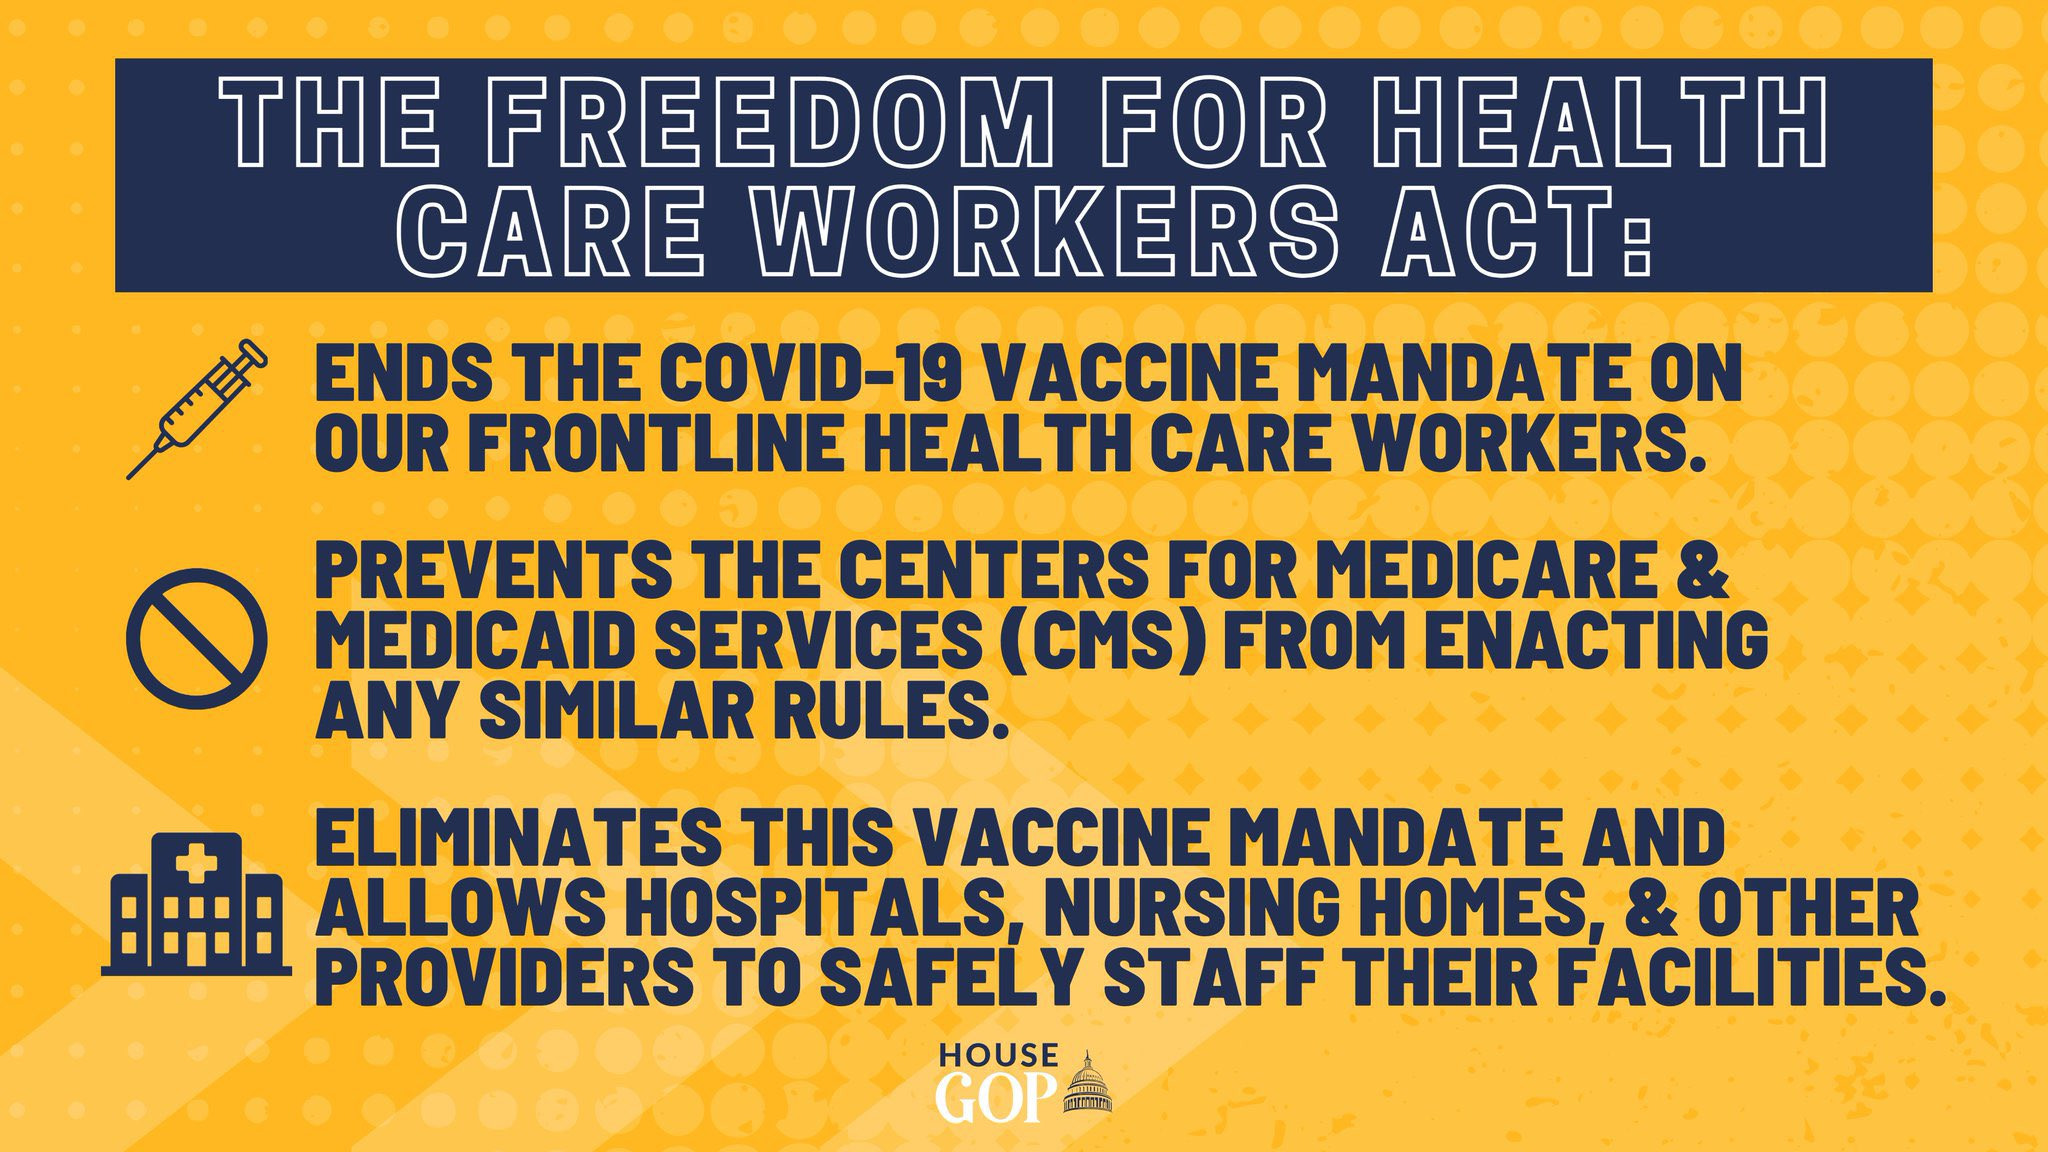 Freedom for Health Care Workers